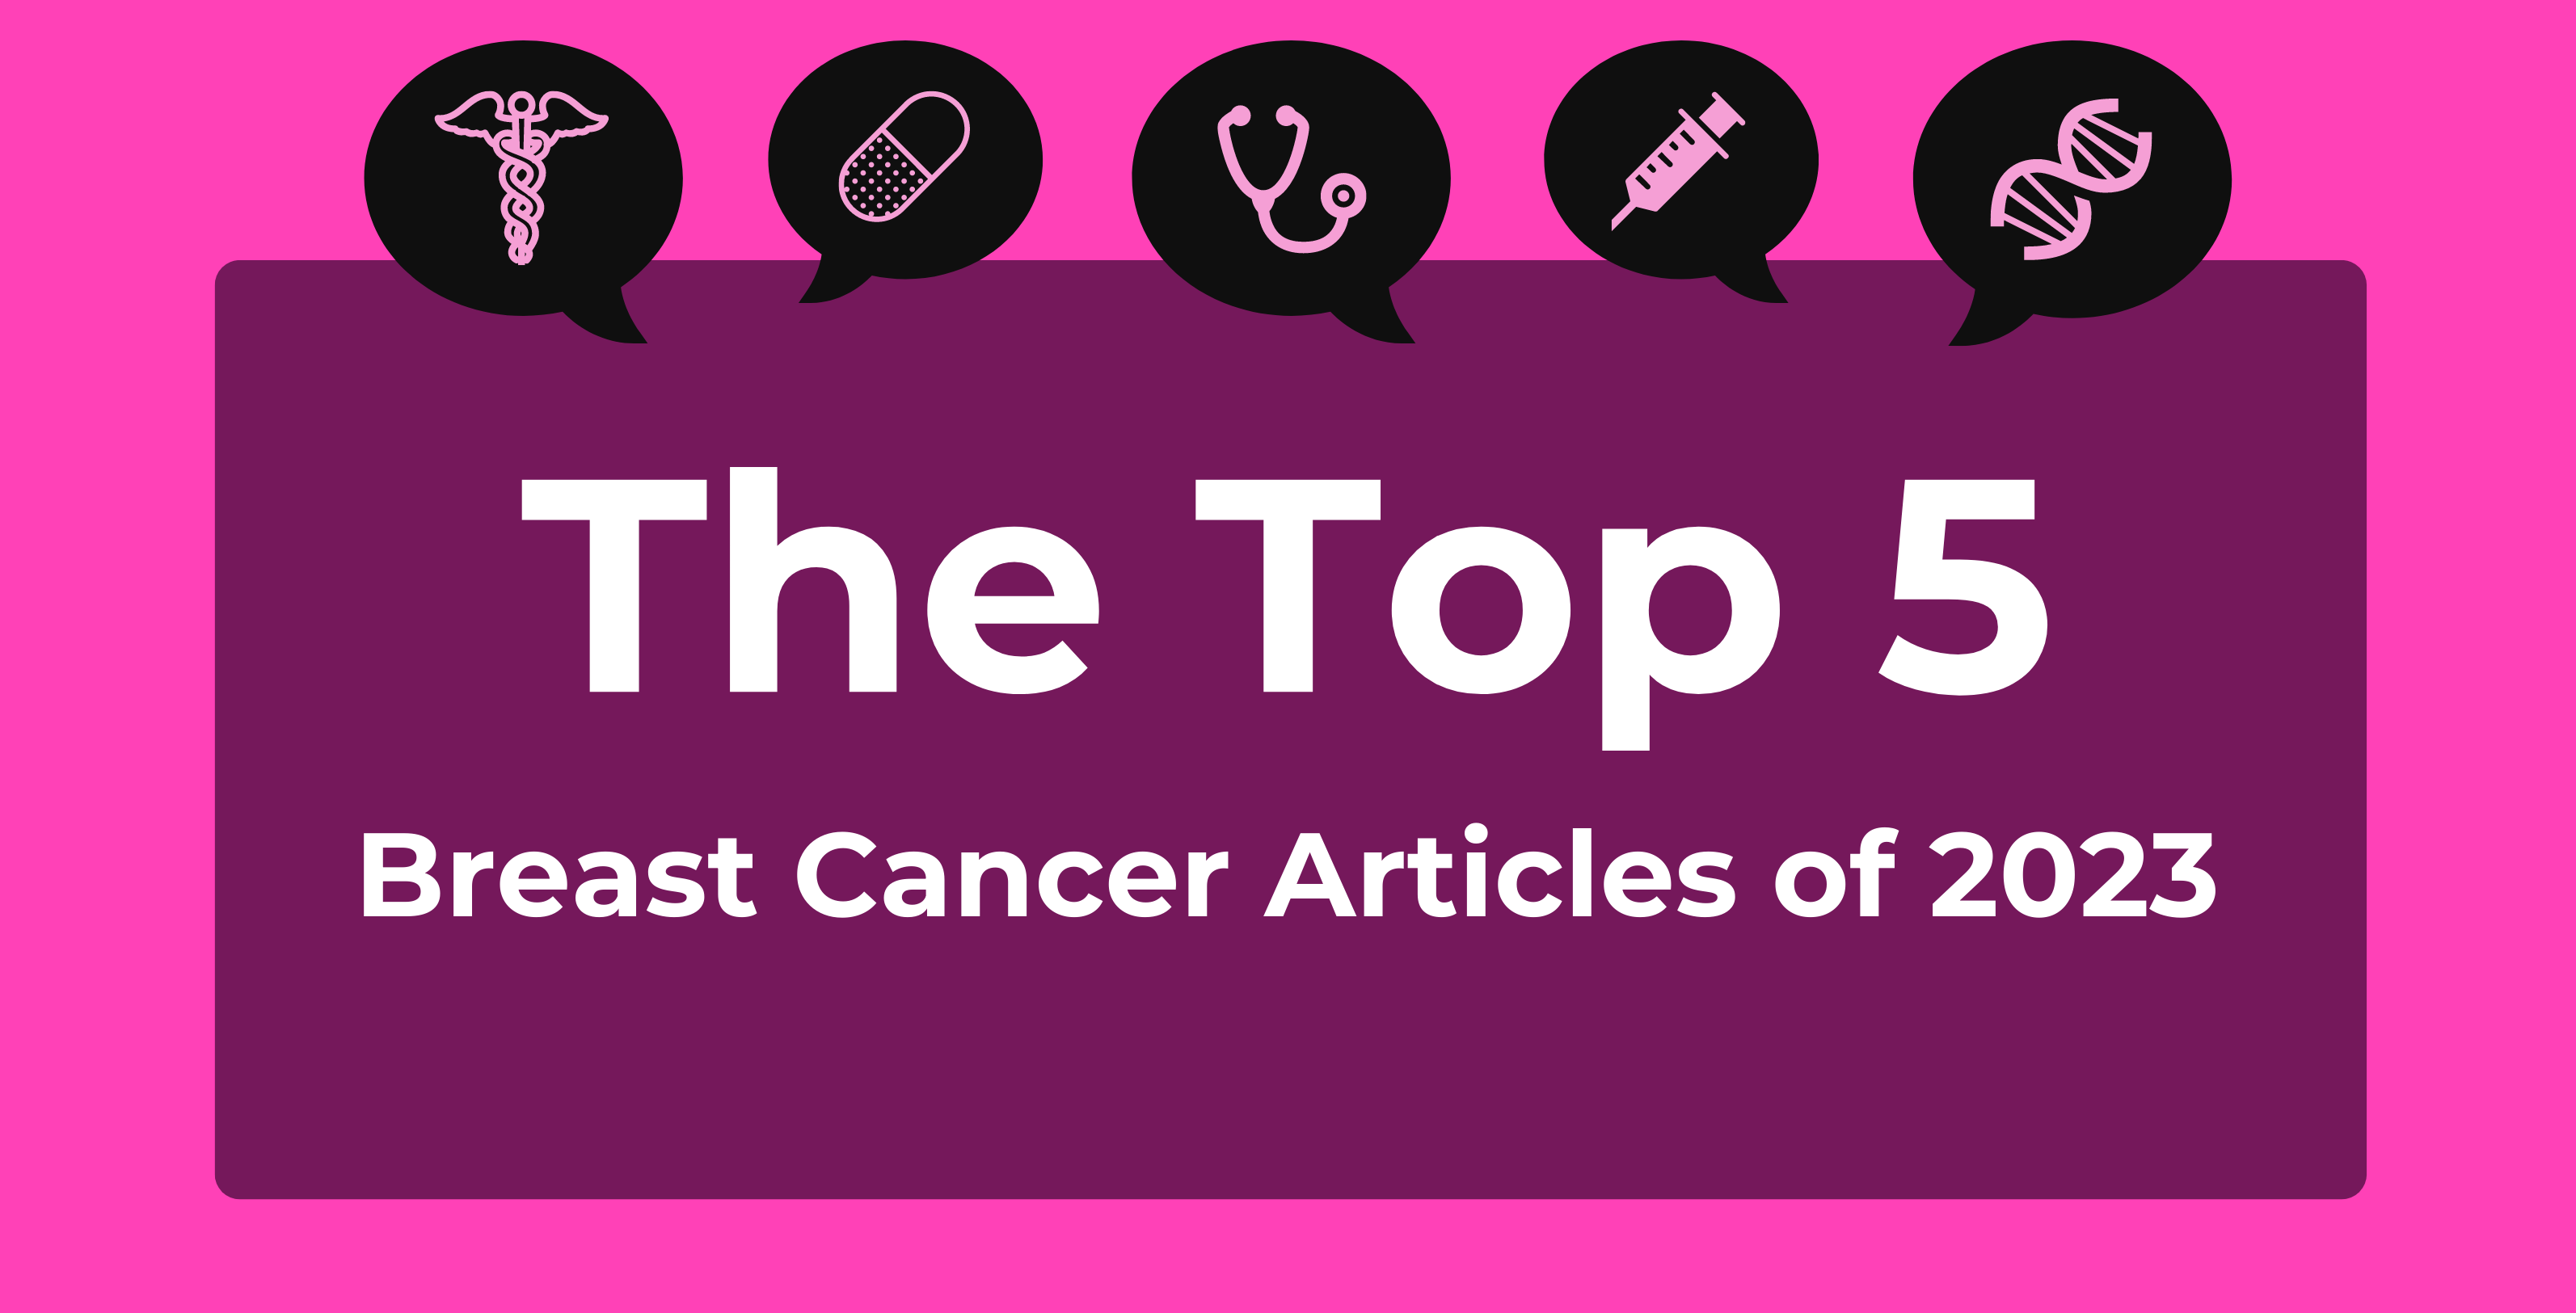 Graphic repping 2023's top breast cancer articles